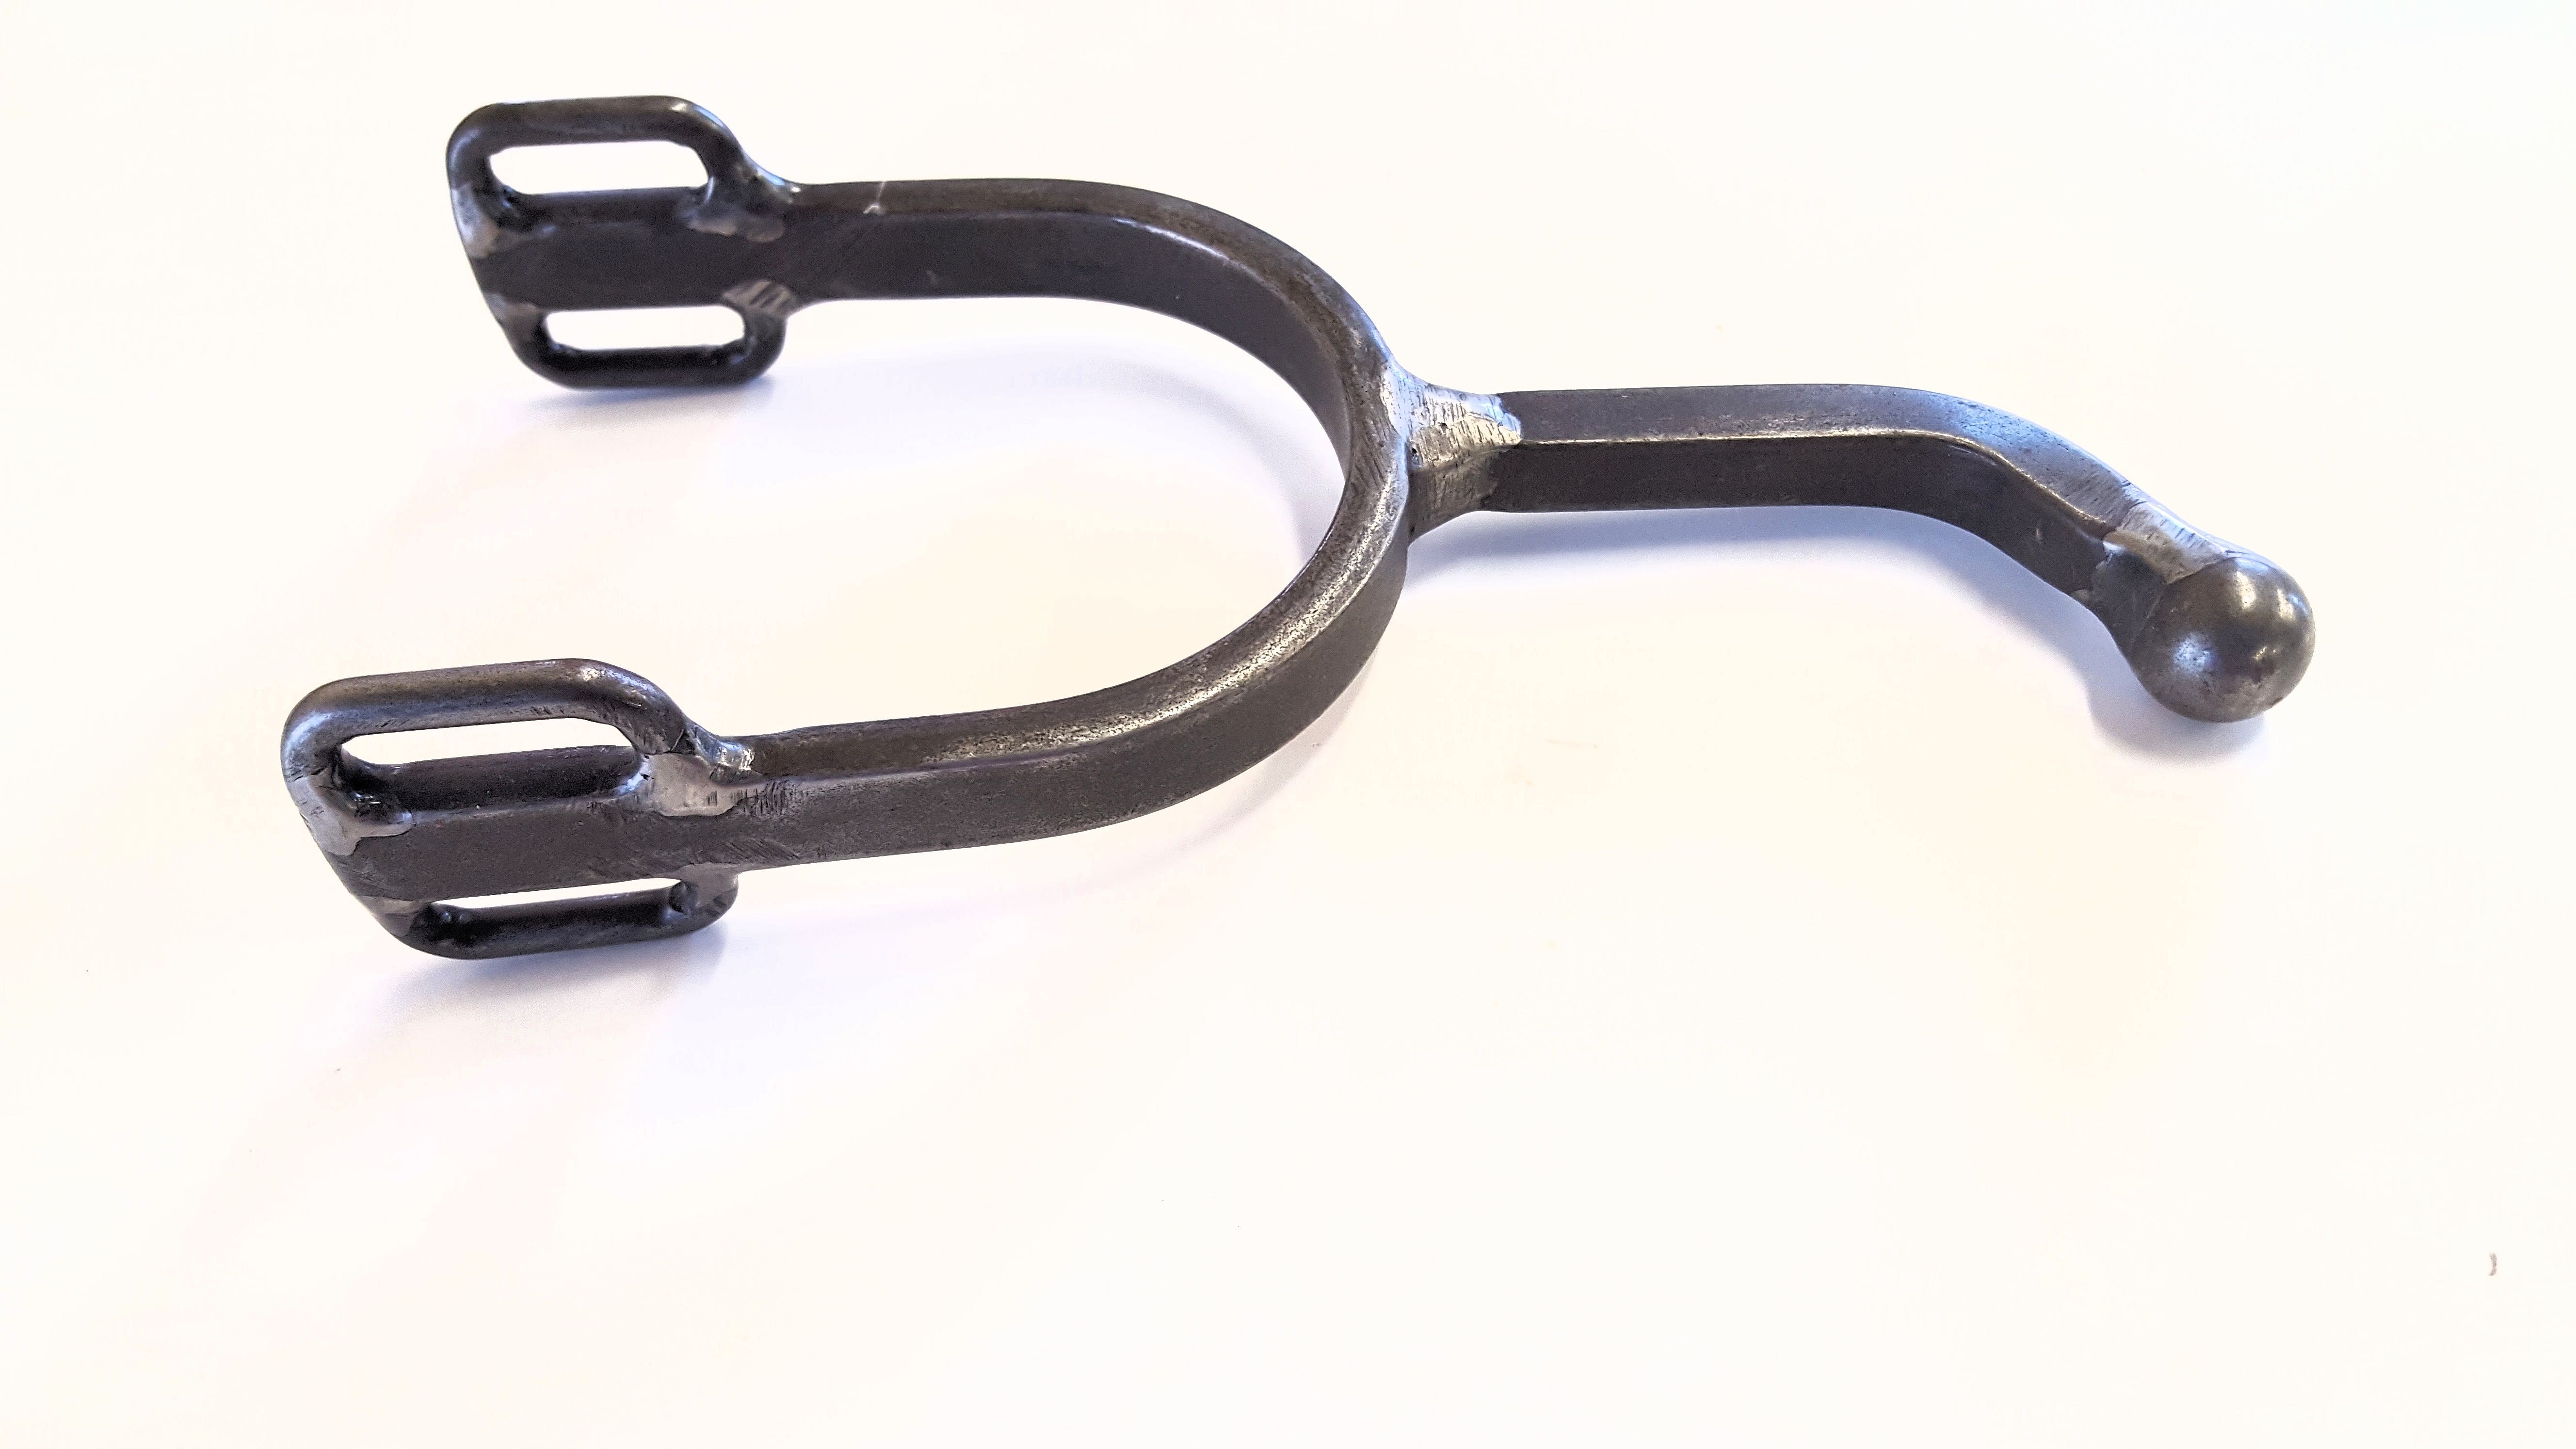 SWEET IRON HUMANE EQUESTRIAN SPURS WITH BEND SHANK